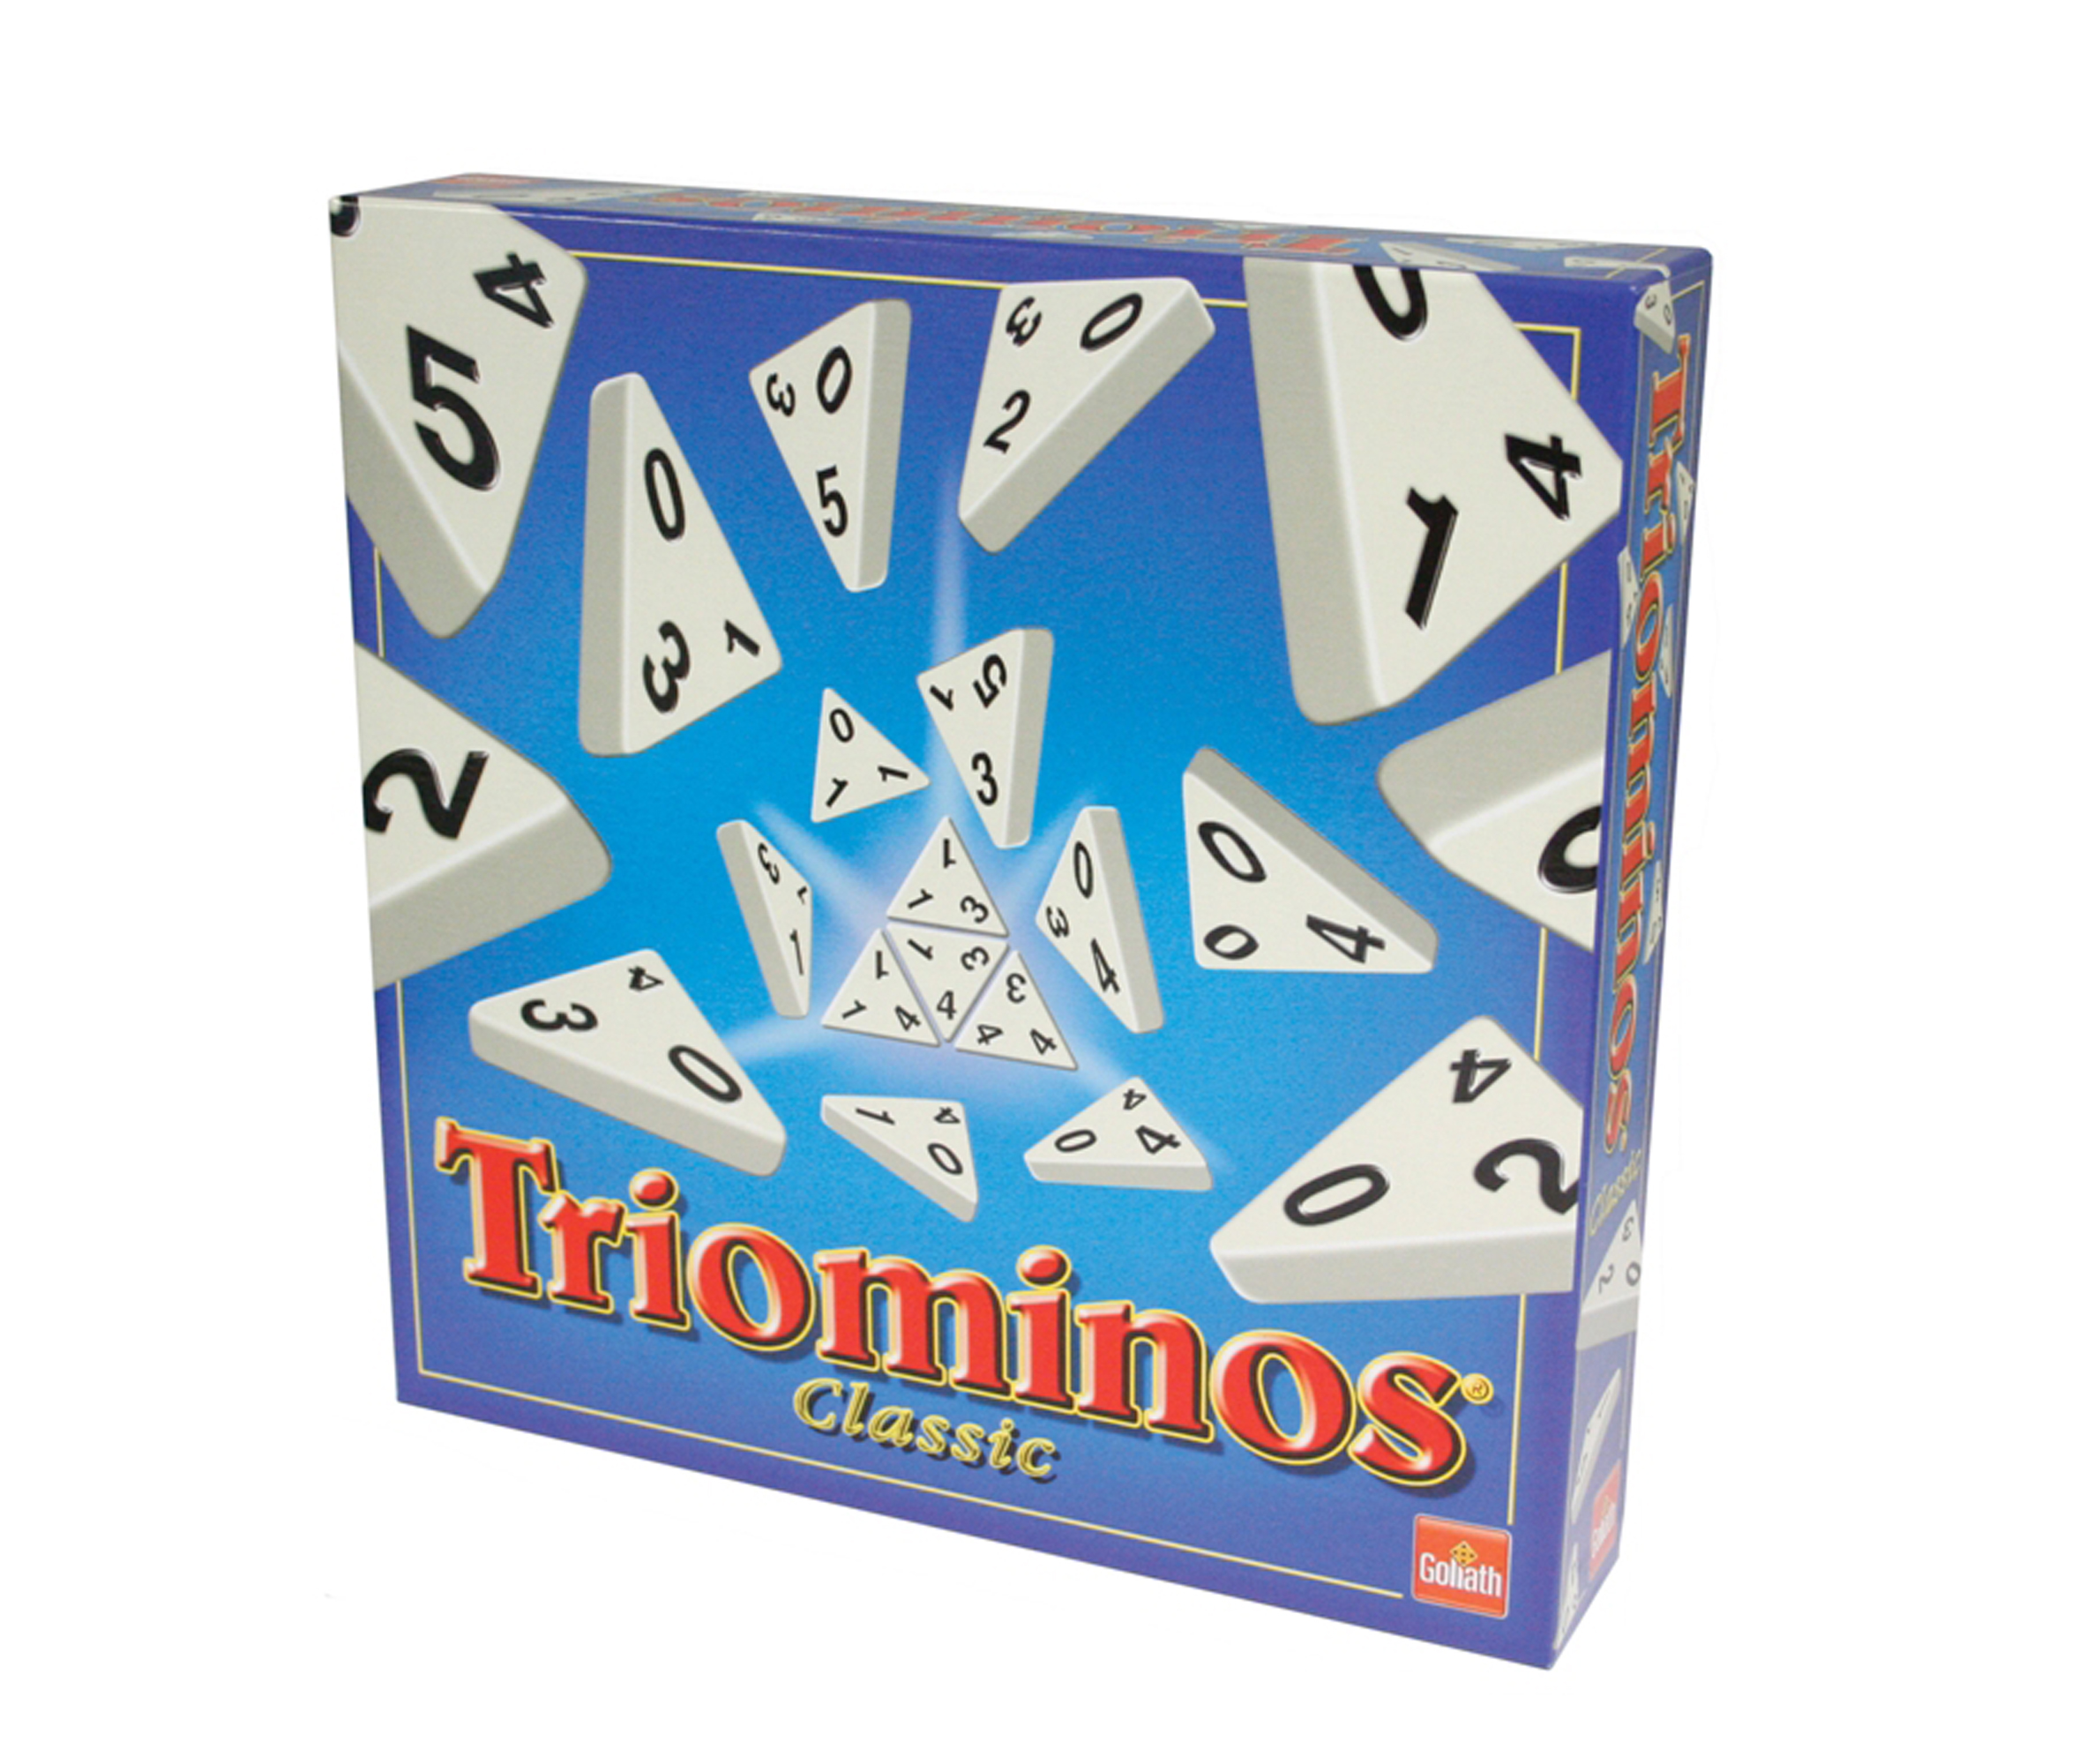 Triominos for iOS and Android